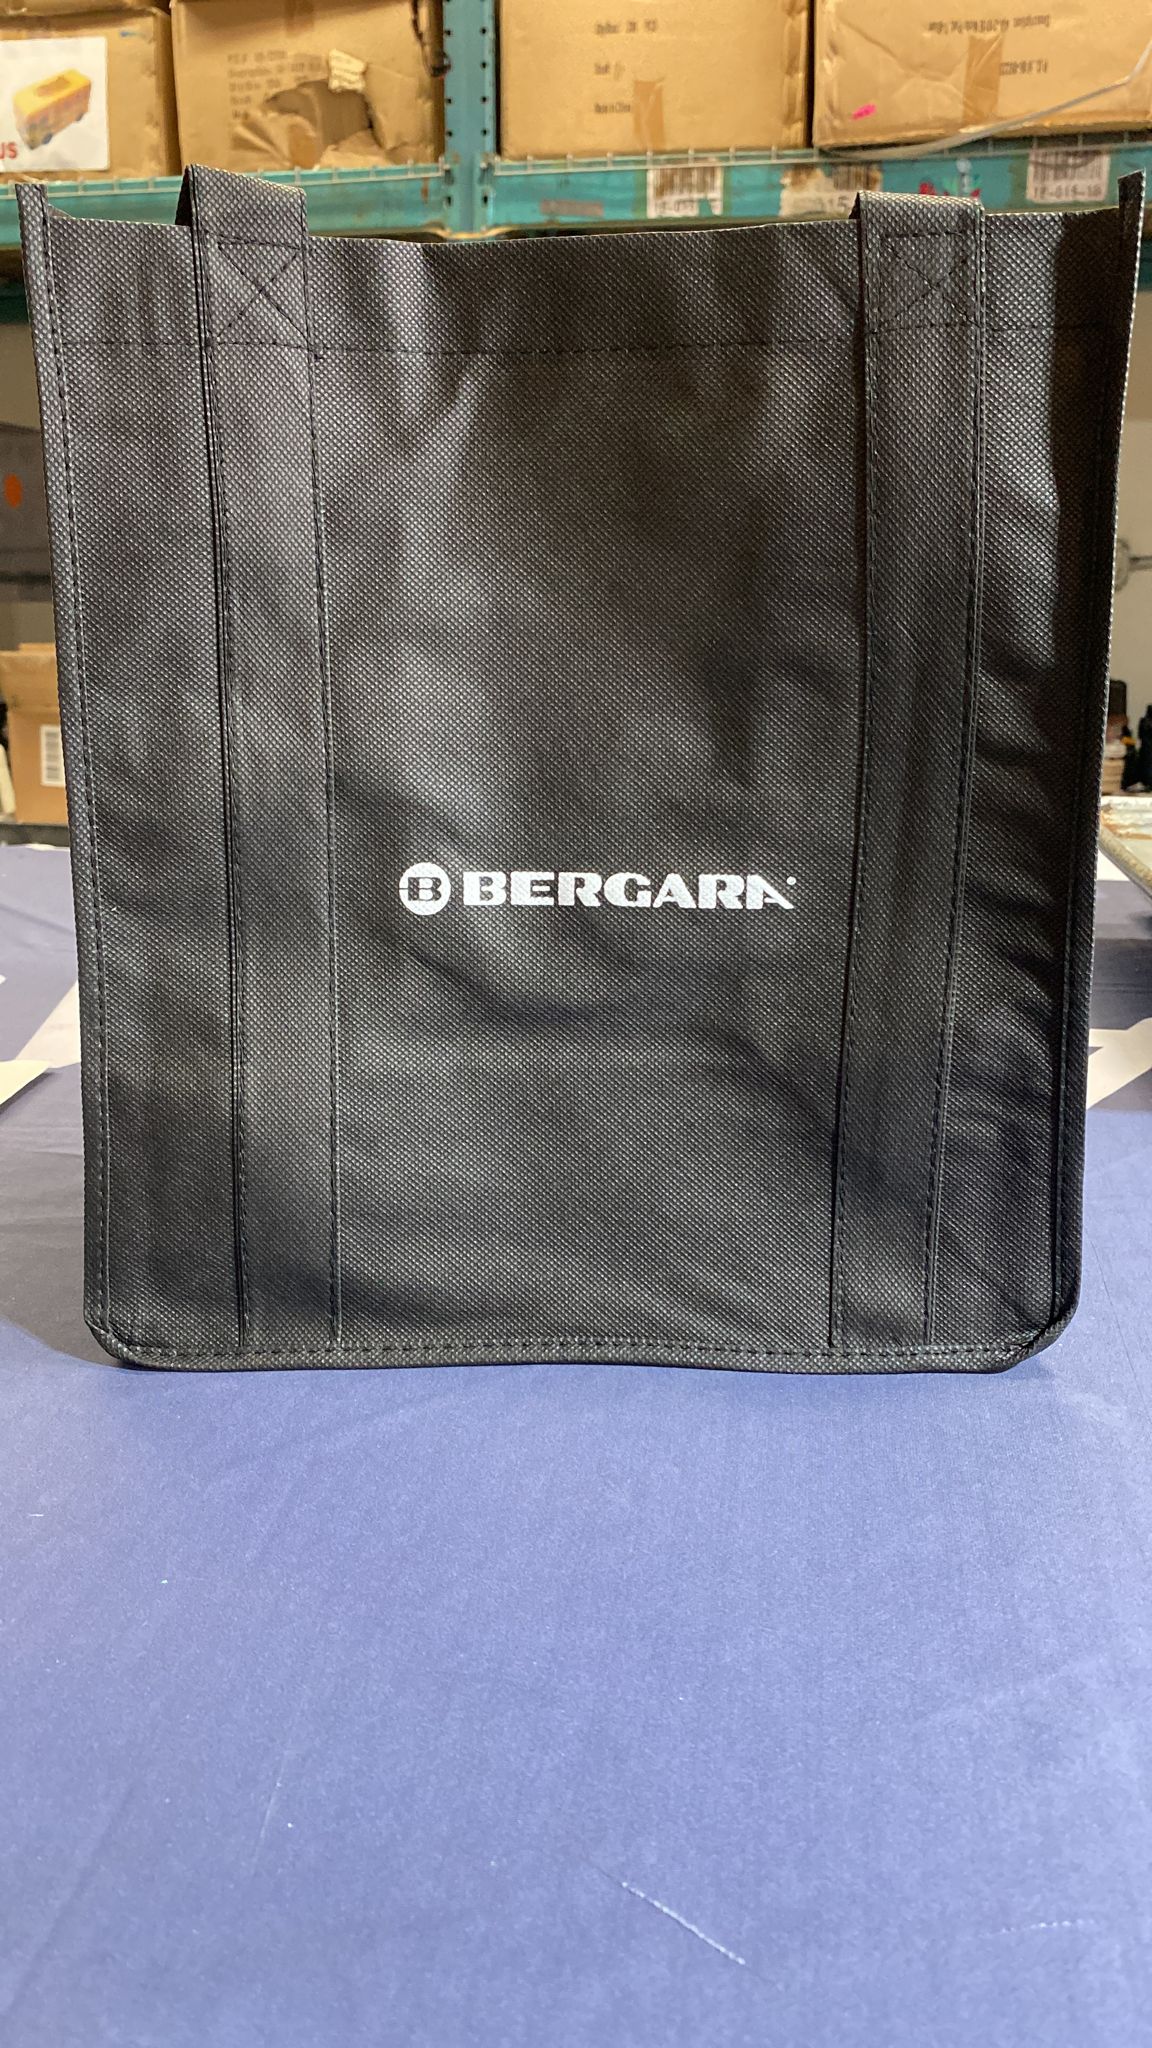 Customizable Textile Bags Printed with your Company Logo or Brand Name